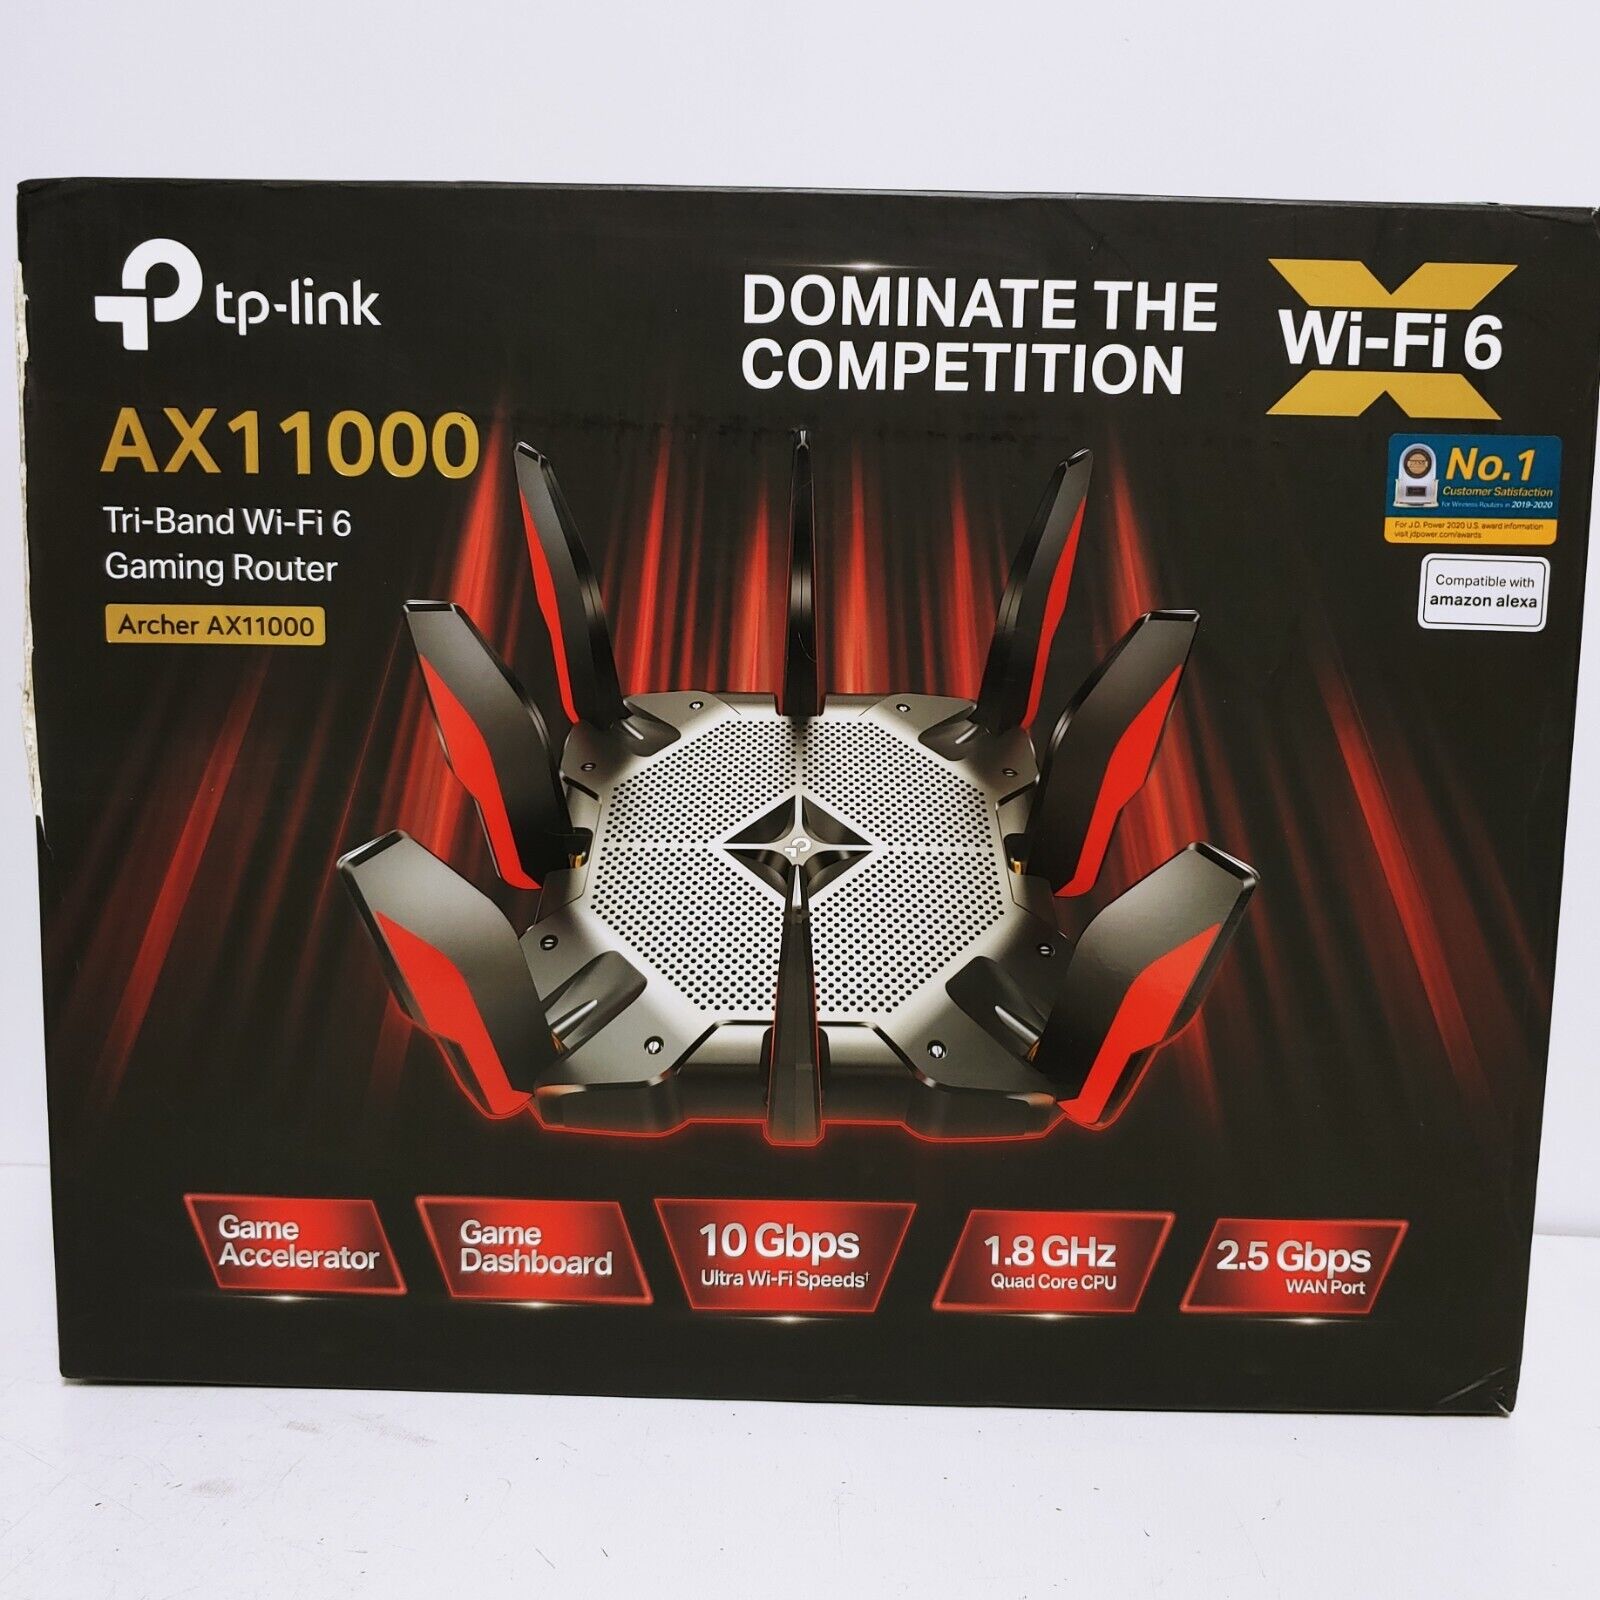 TP-LINK Archer AX11000 Tri-Band Wi-Fi 6 Gaming Router - Black/Red